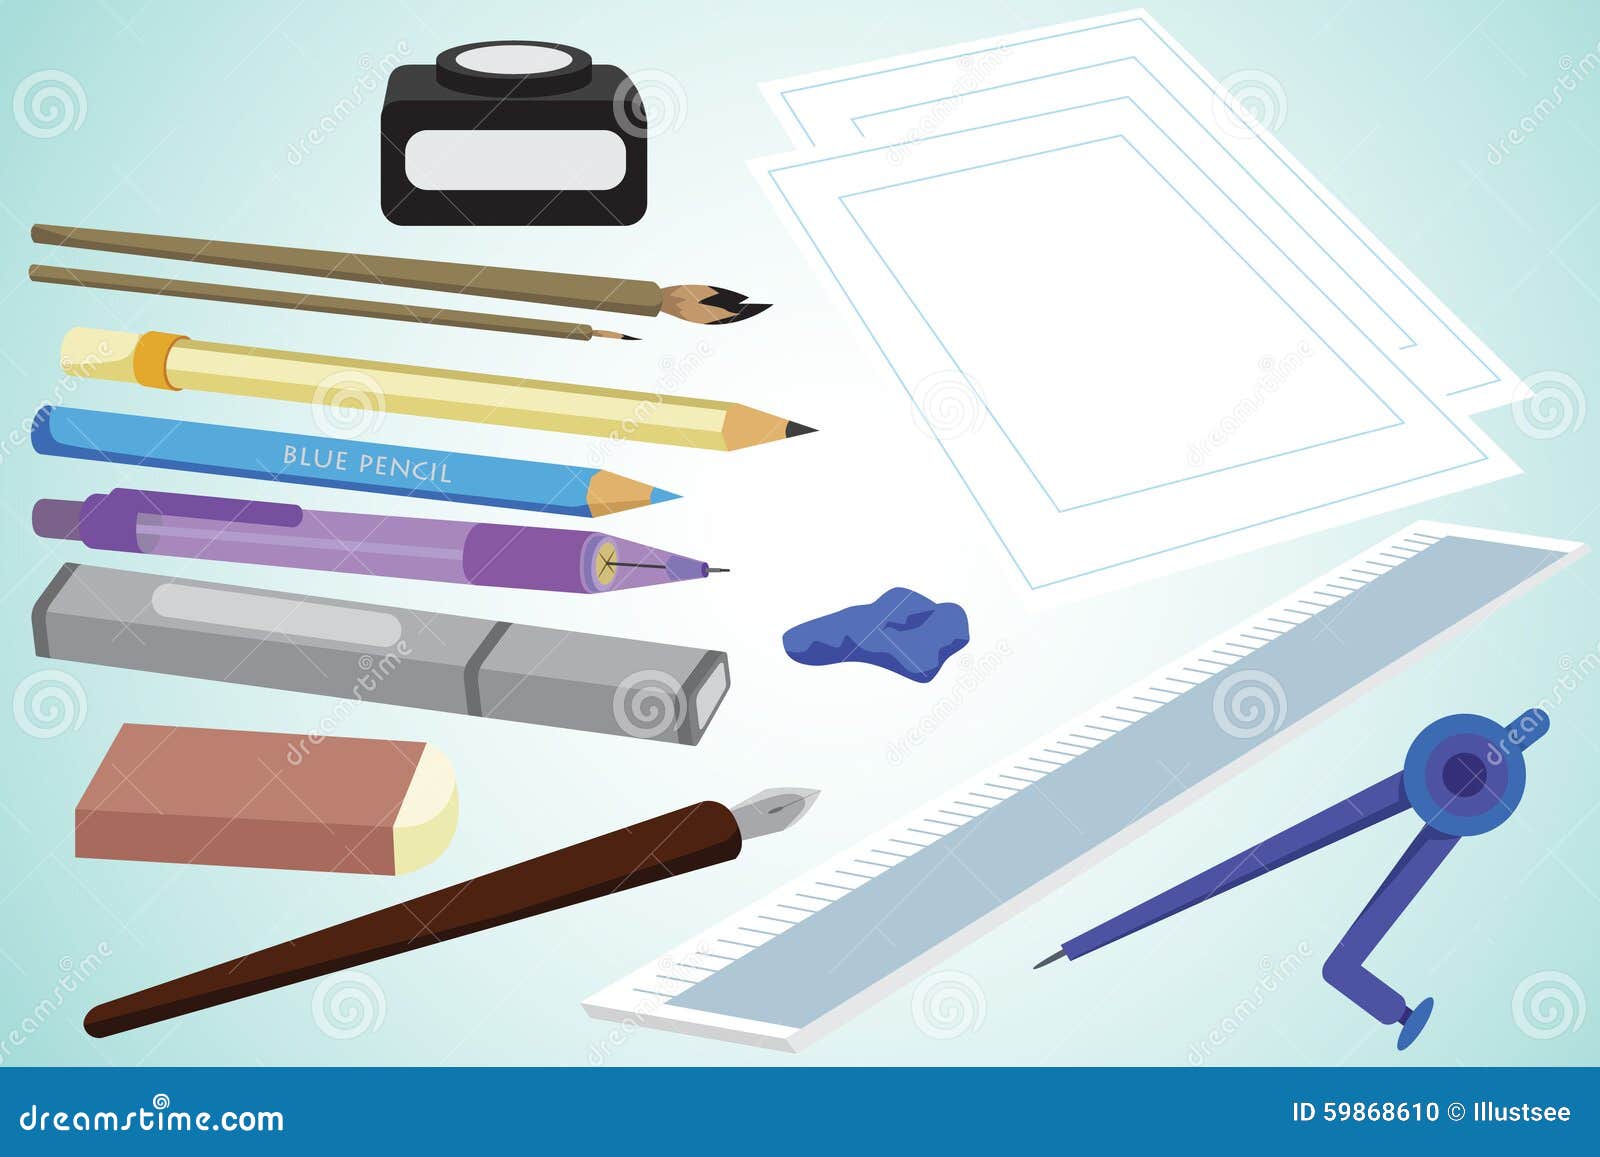 Drawing tools stock vector. Illustration of stationary - 59868610